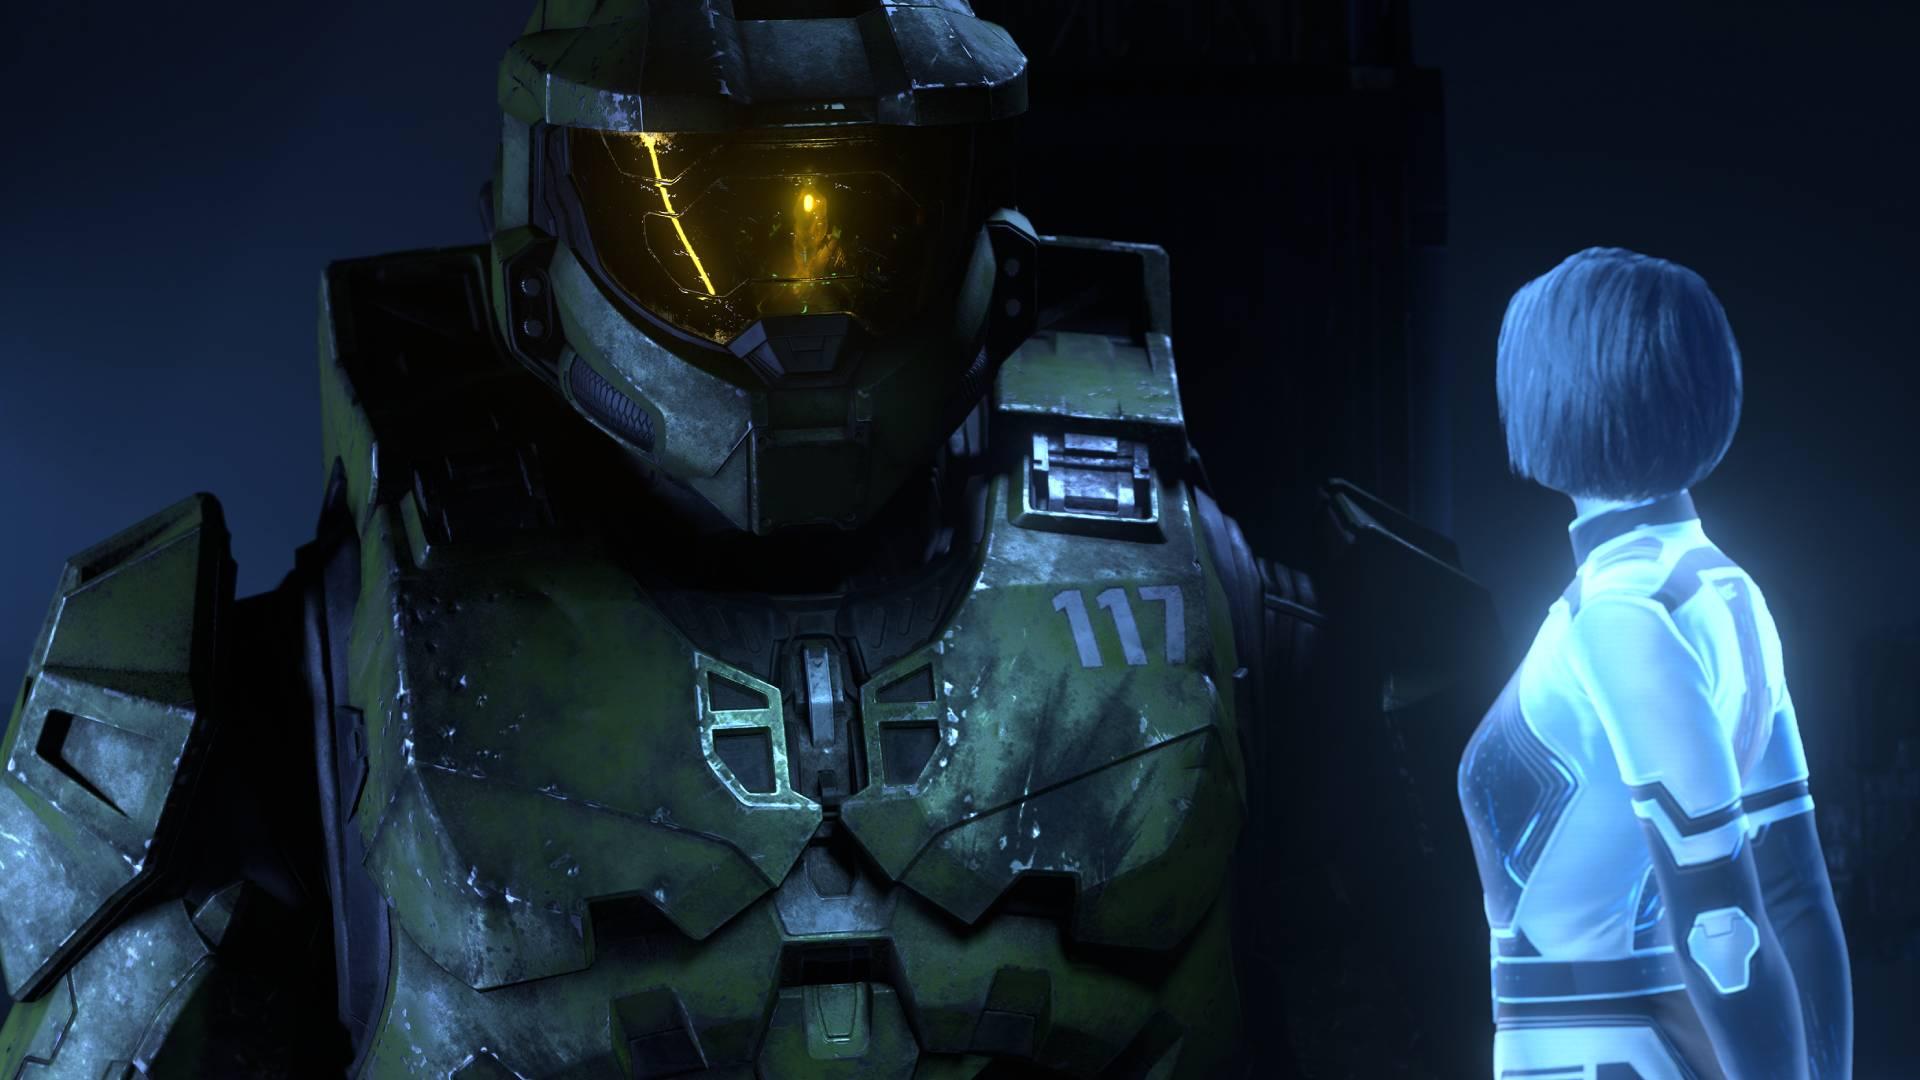 See Master Chief Jump From The Pelican In The Leveled Up Halo Series Trailer